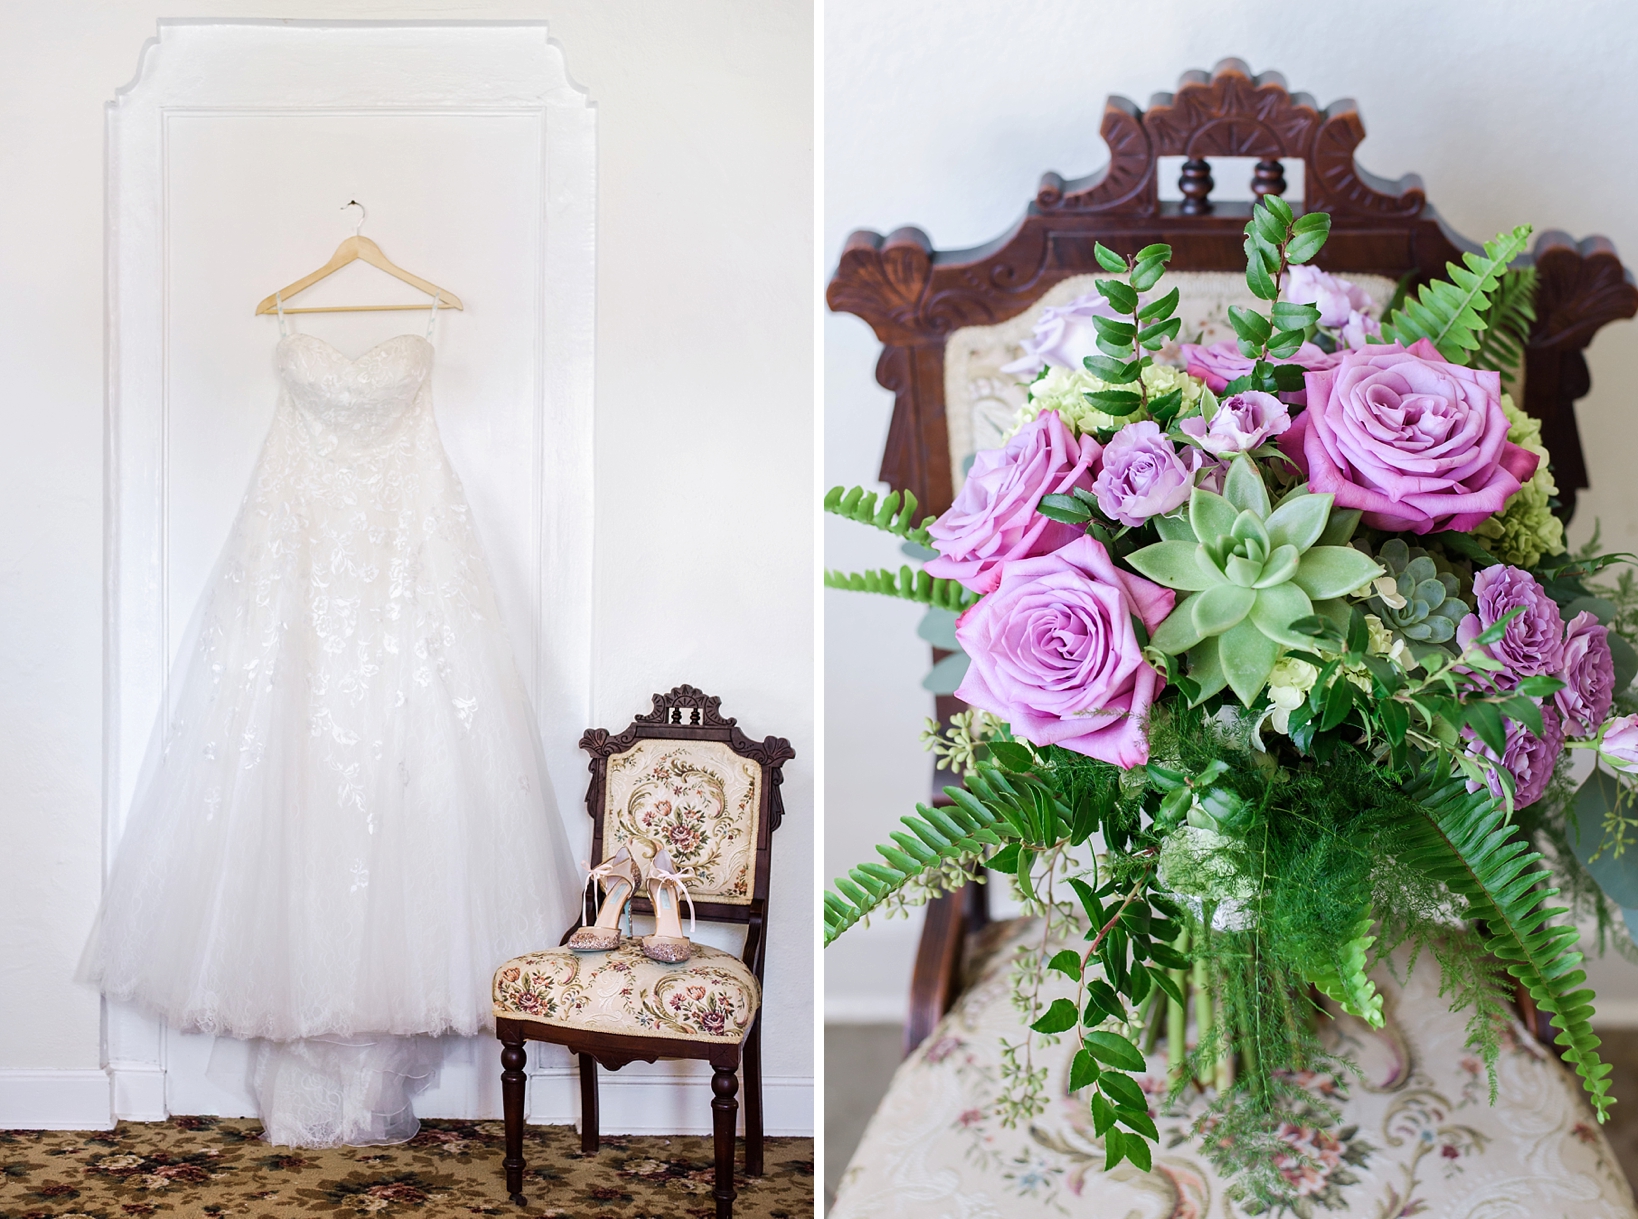 Wedding dress on a hanger with wedding shoes and bride's bouquet of succulent flowers